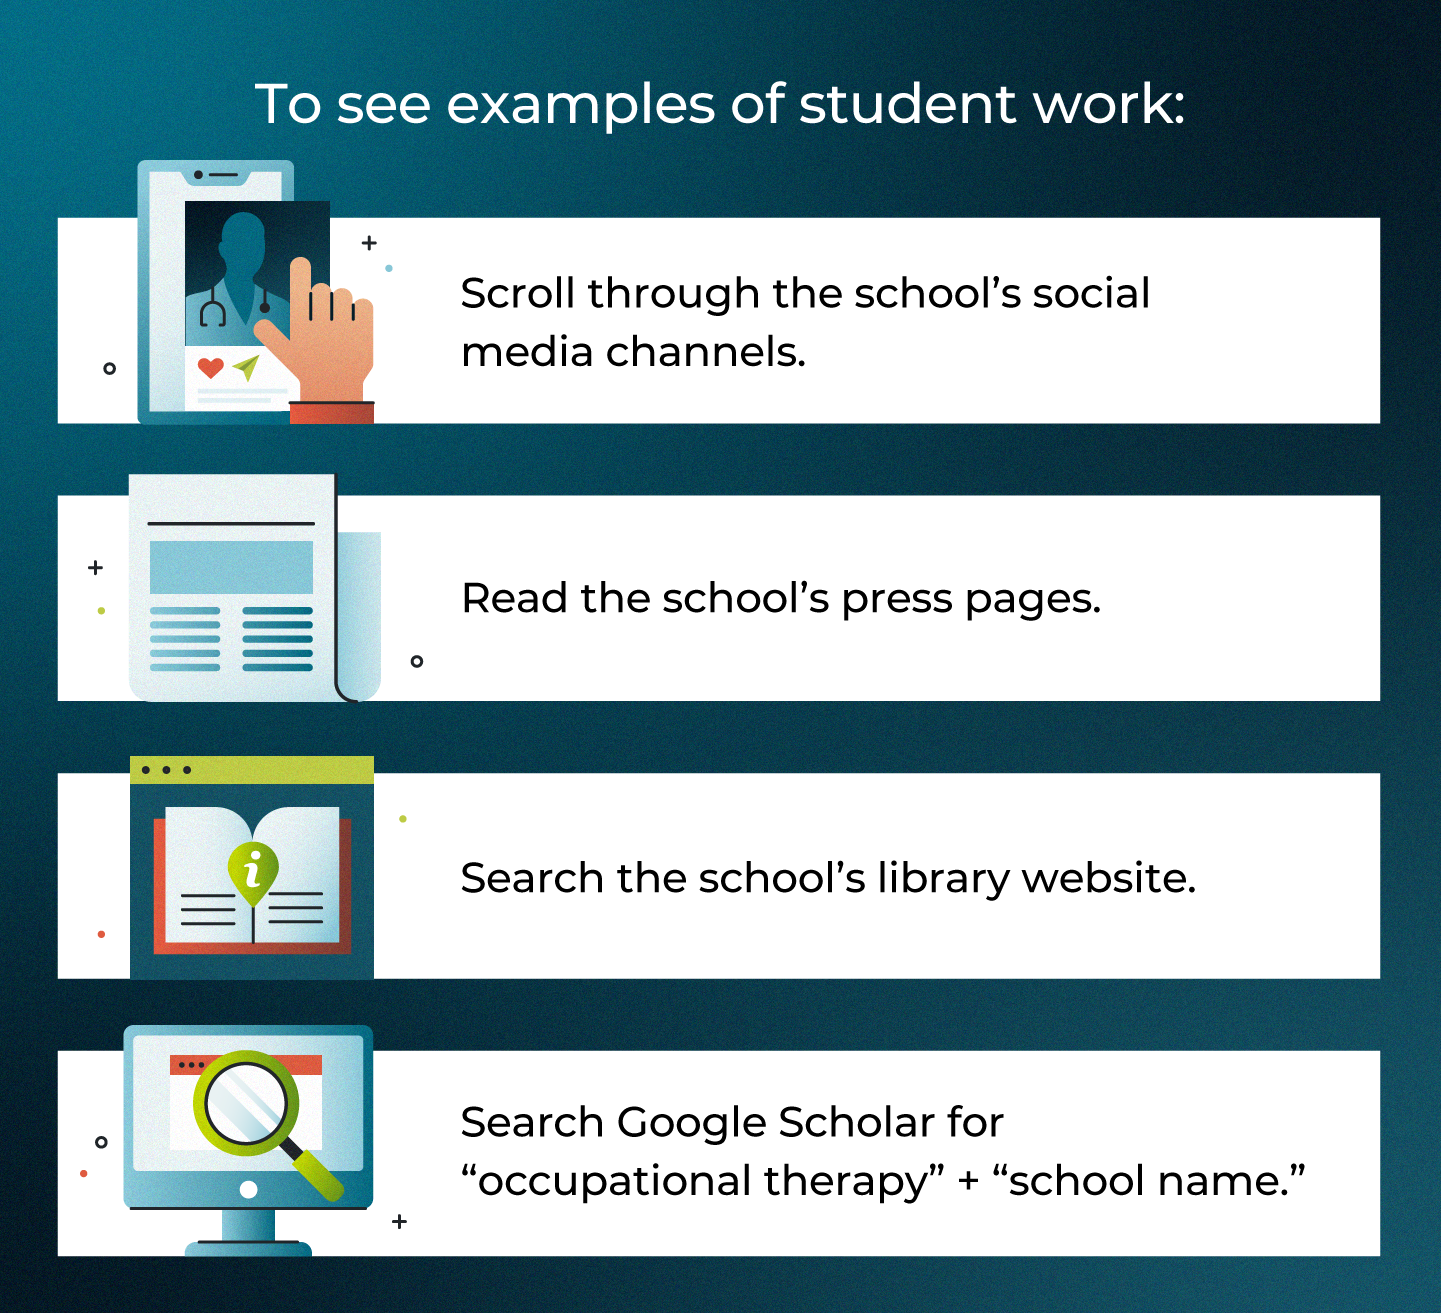 Tips to find student work when looking at OT schools.